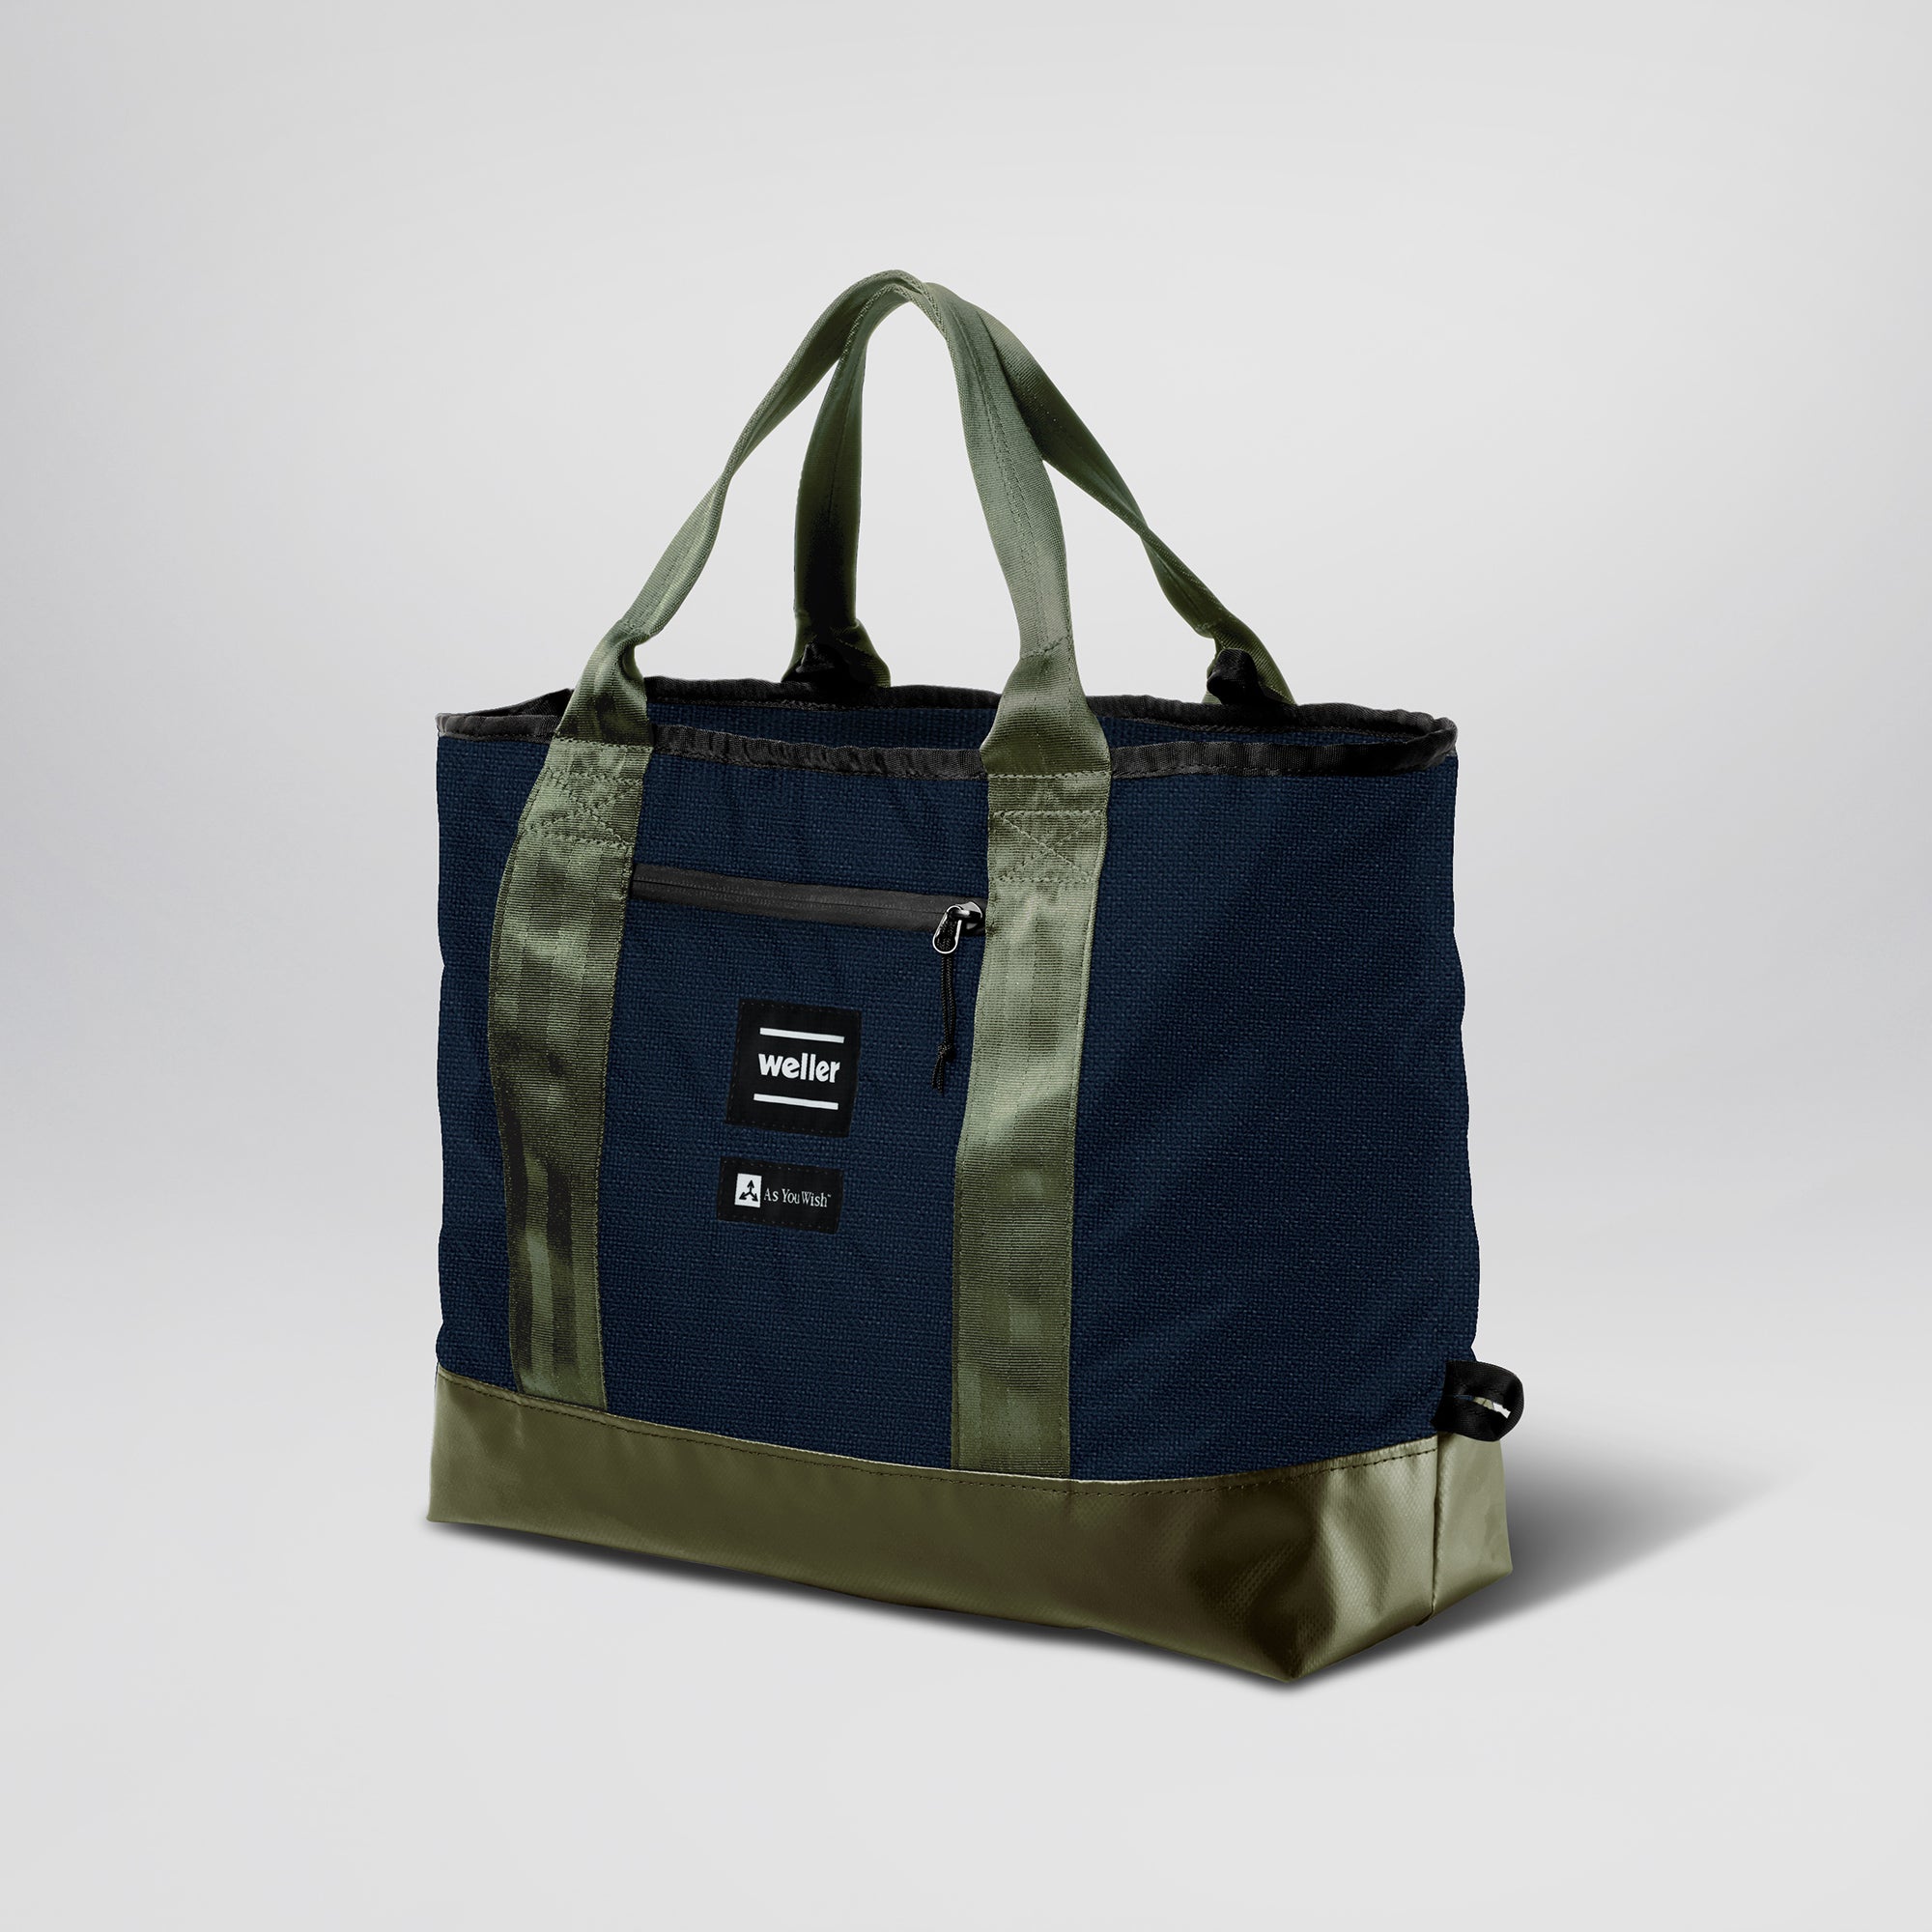 The Catchall Tote Bag - Navy/Olive